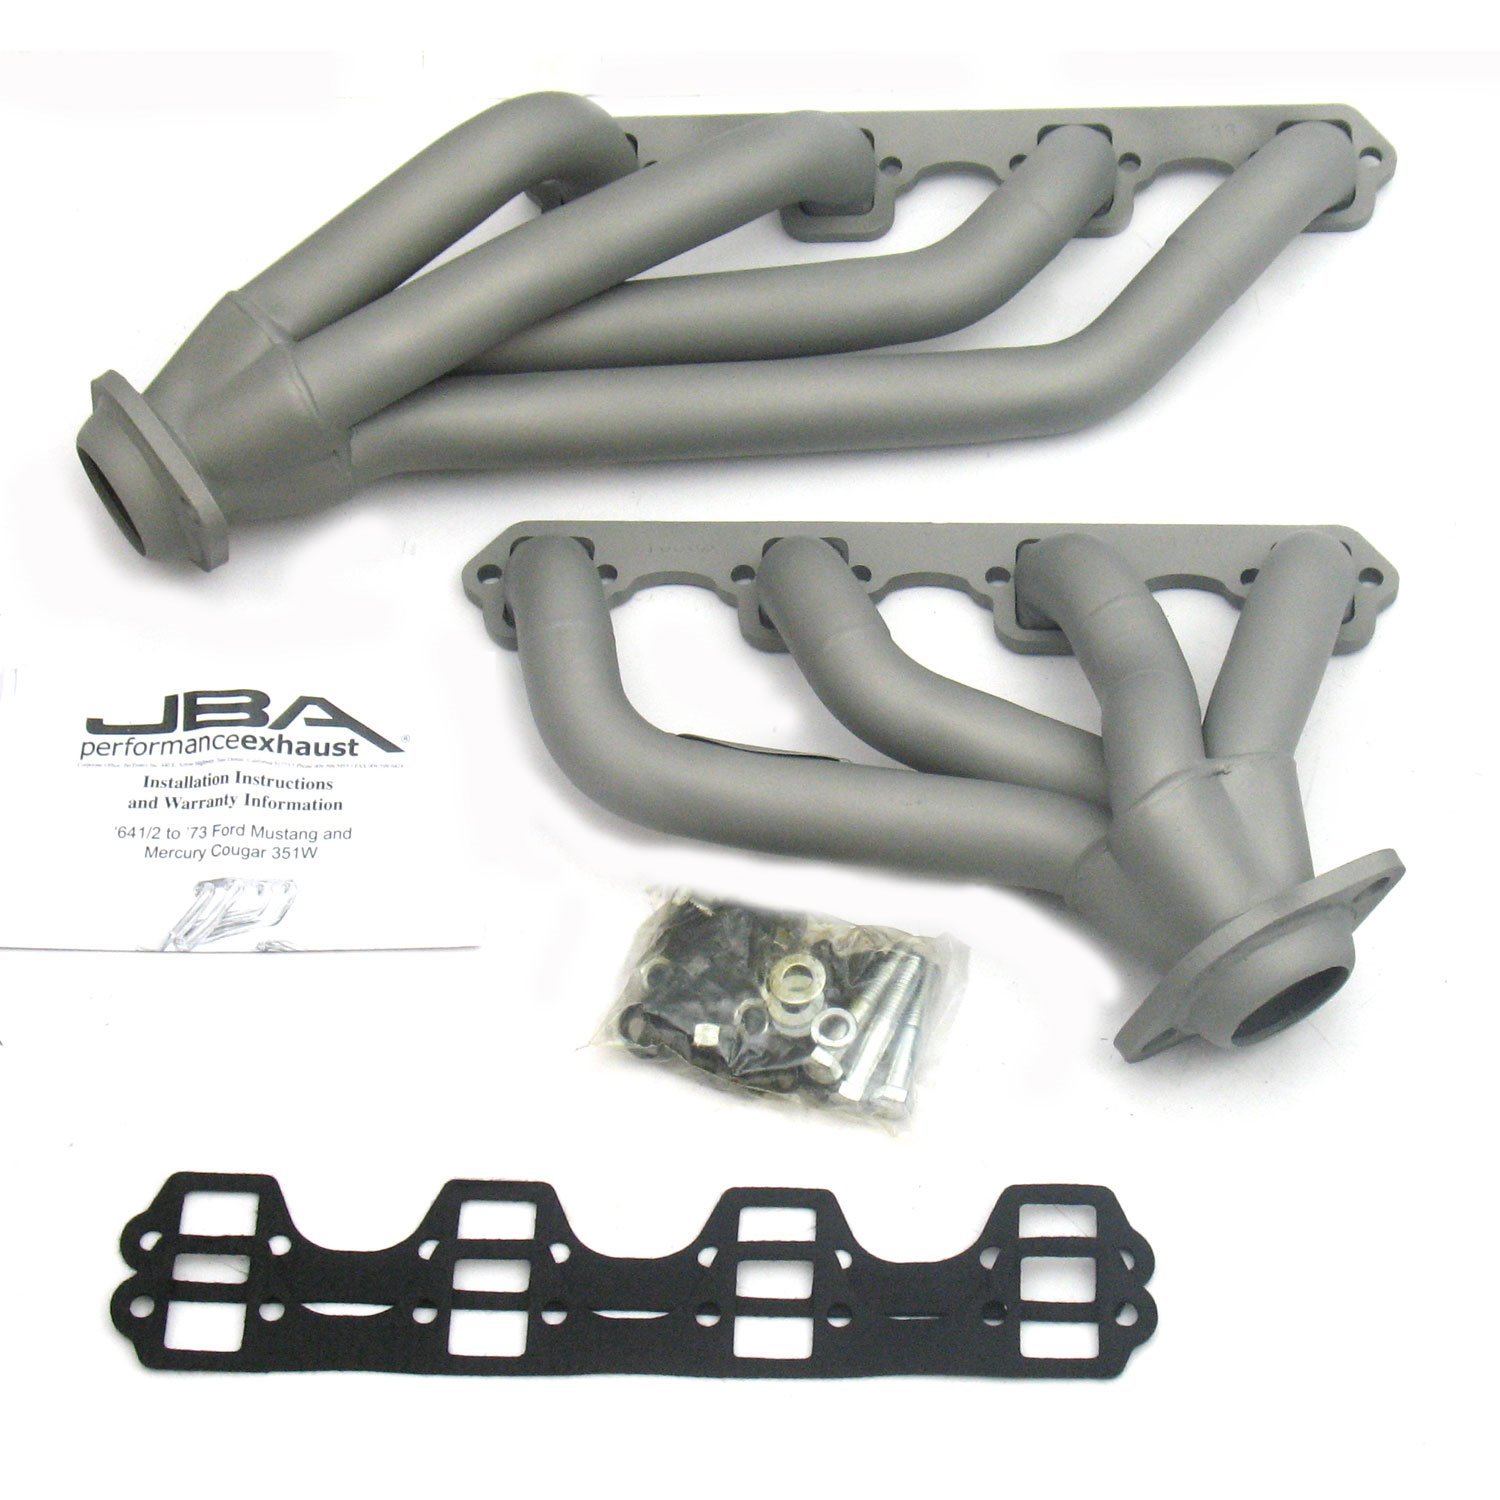 Ford 351w shorty headers #5